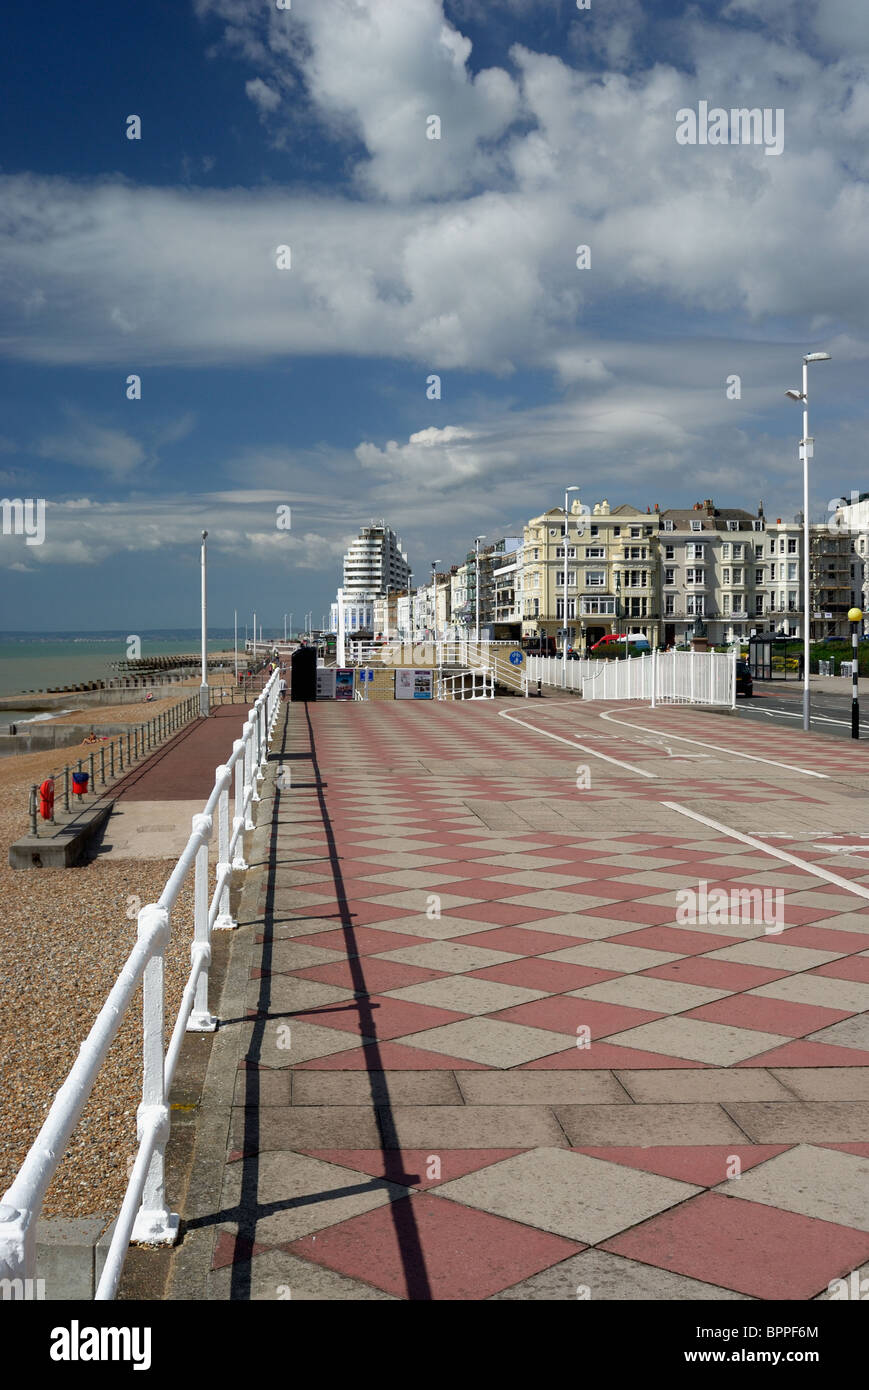 Hastings seafront, East Sussex, Regno Unito Foto Stock